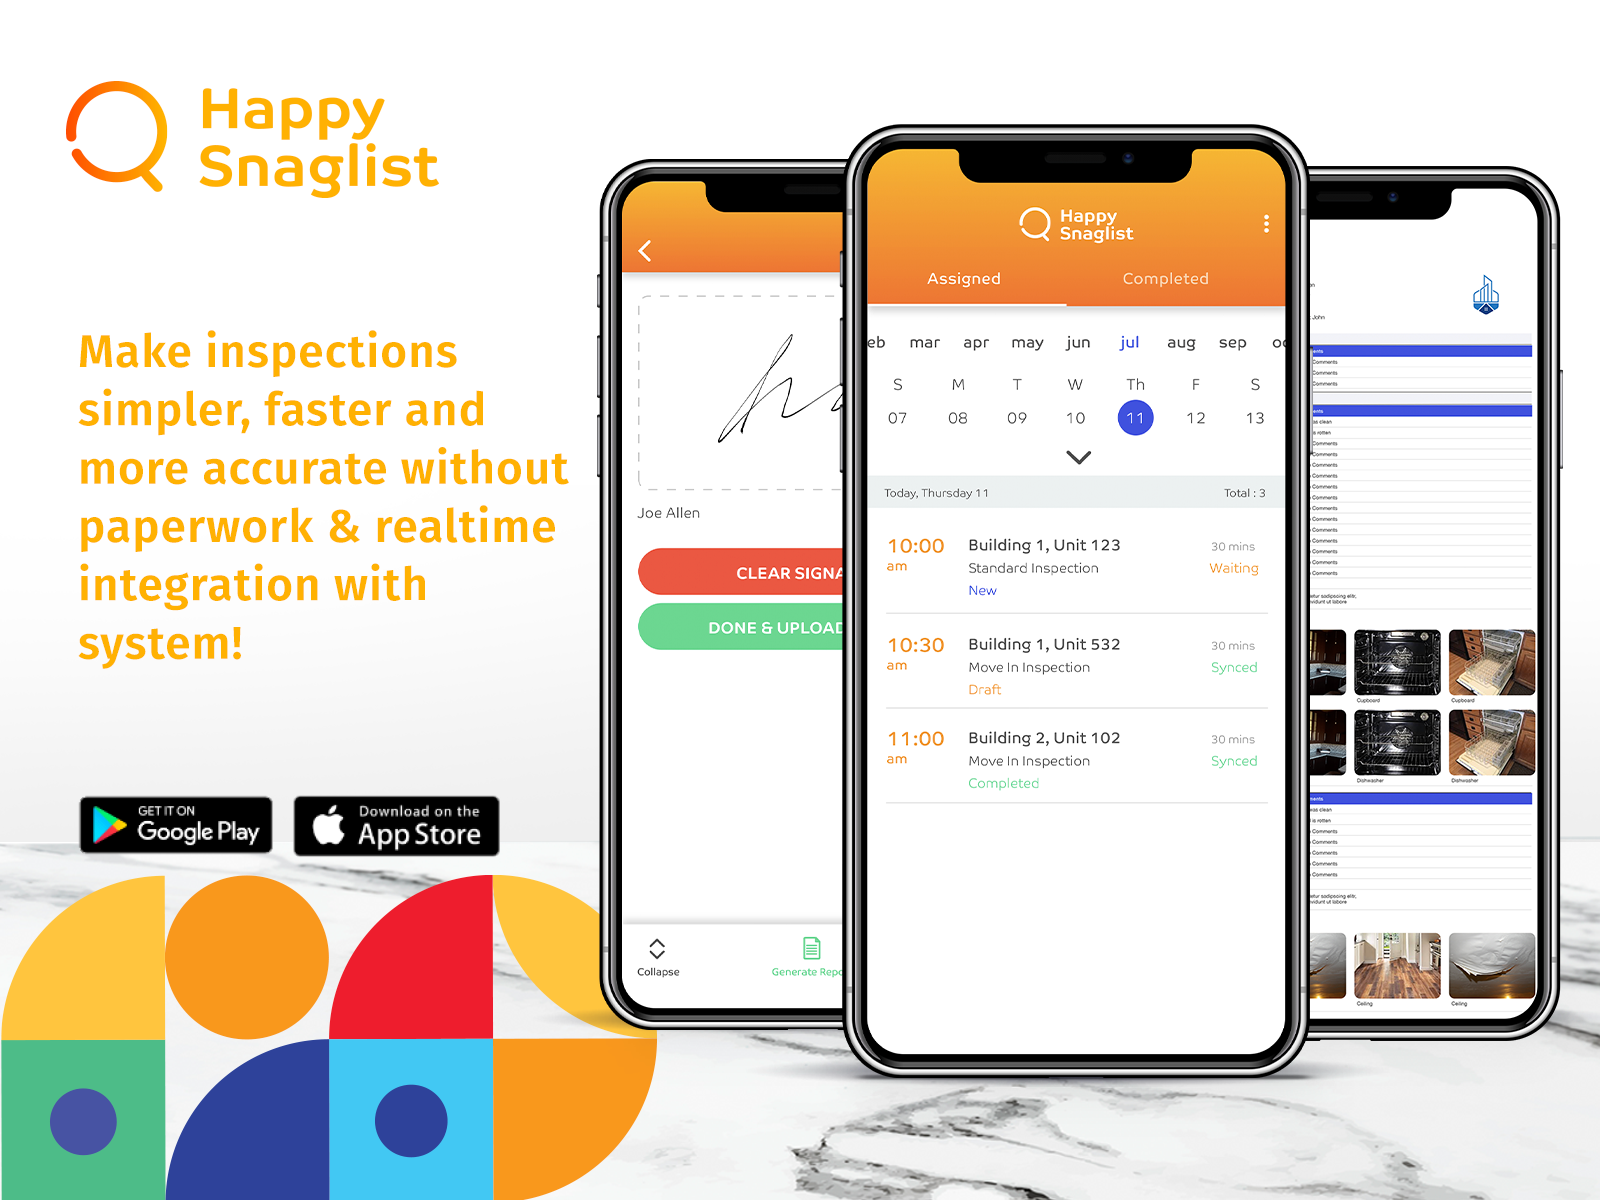 HappyTenant Software - HappySnaglist - mobile app for inspections that allows your inspections team to work in a paperless environment with end-to-end, and complete integration with the core system for realtime and transparent reporting.